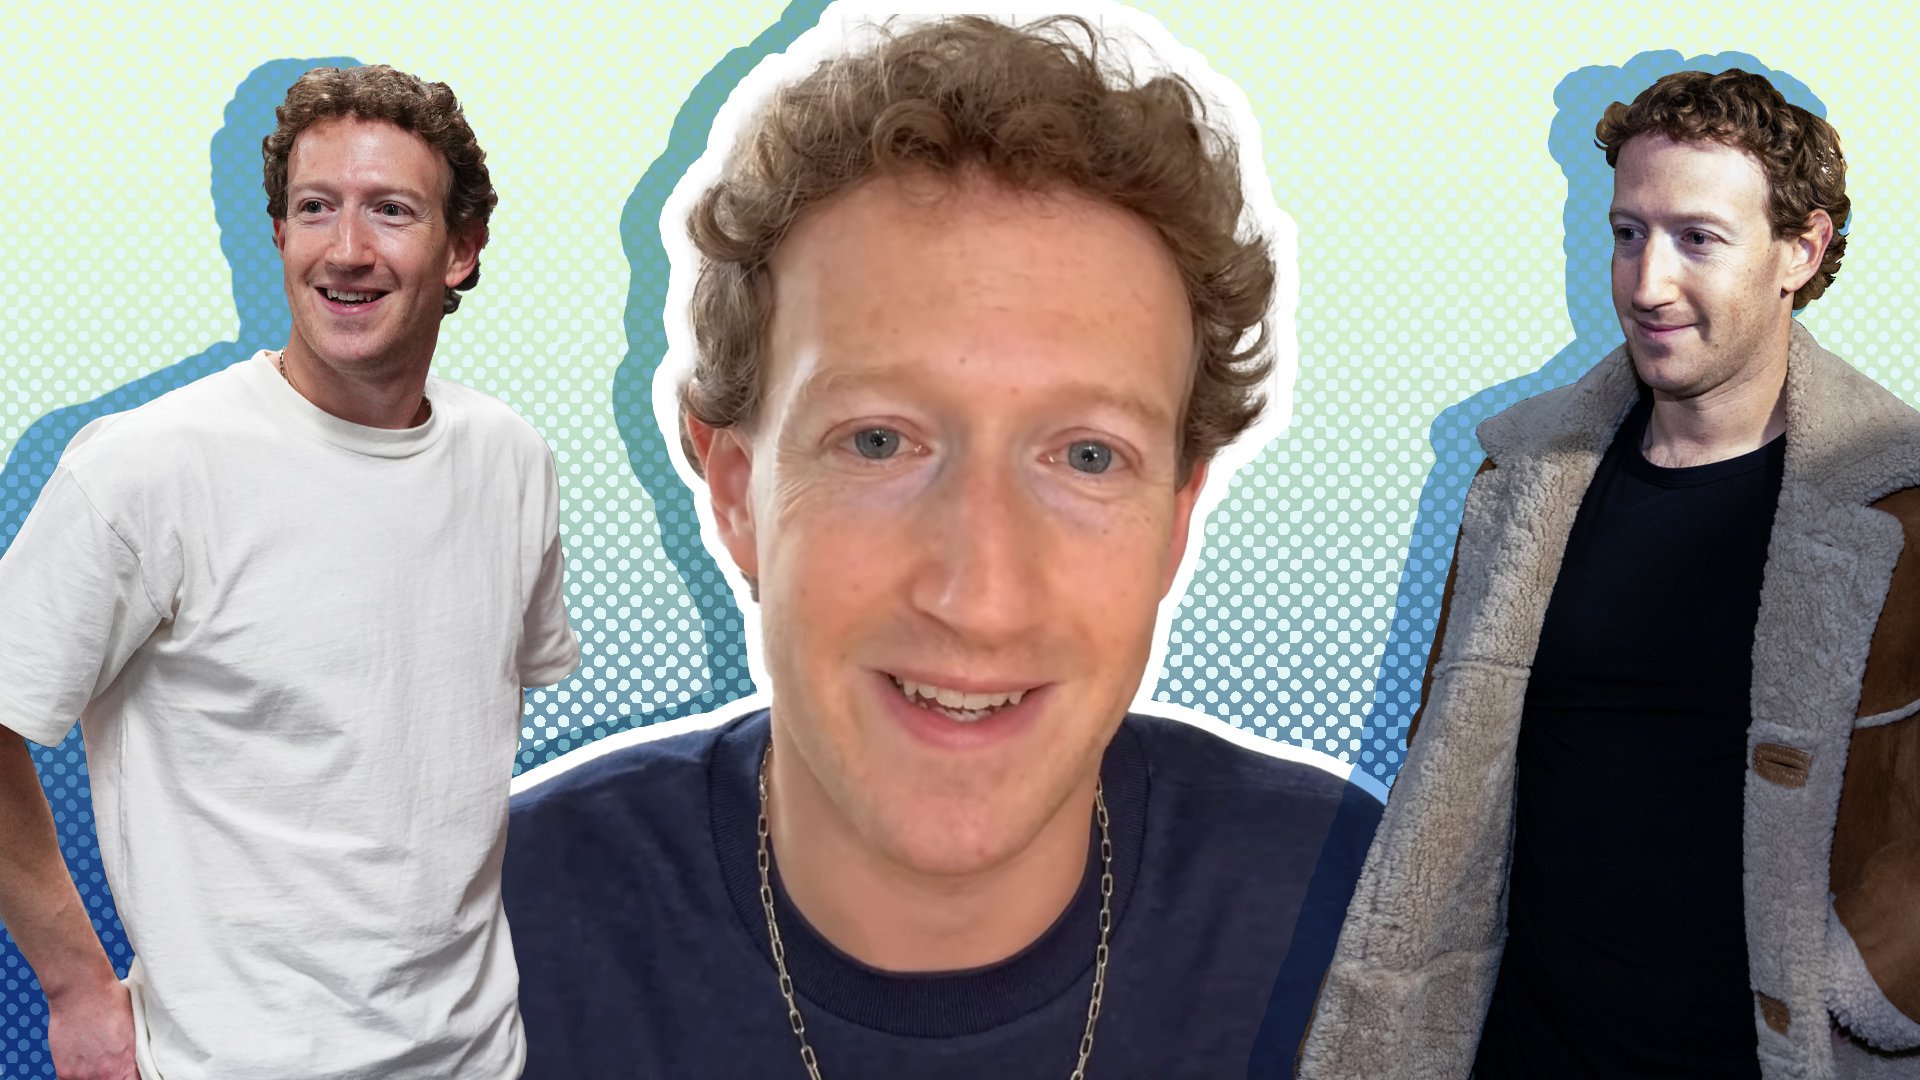 Three photos of Zuckerberg: one of him in a white tee, one of him in a blue tee and chain, and one of him in a shearling jacket.